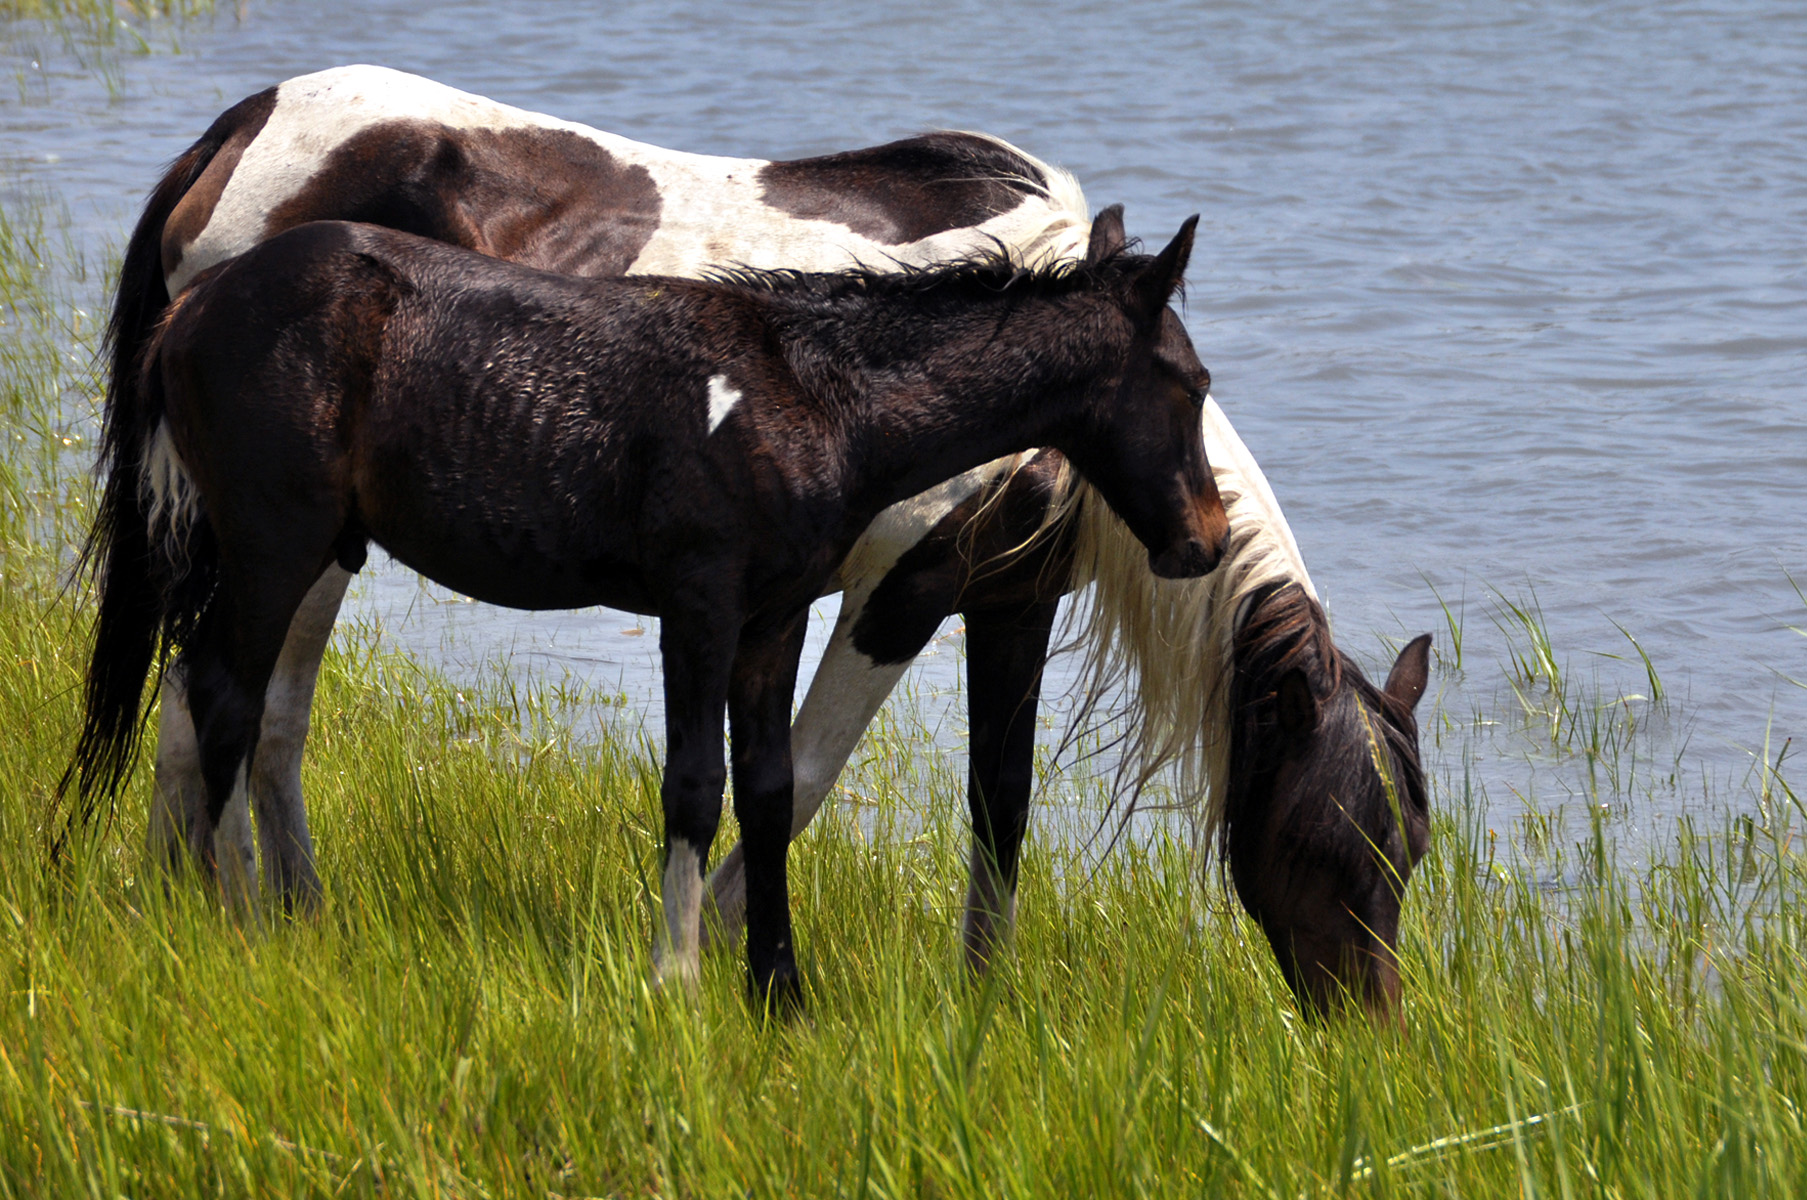 A Chincoteague pony and her foal